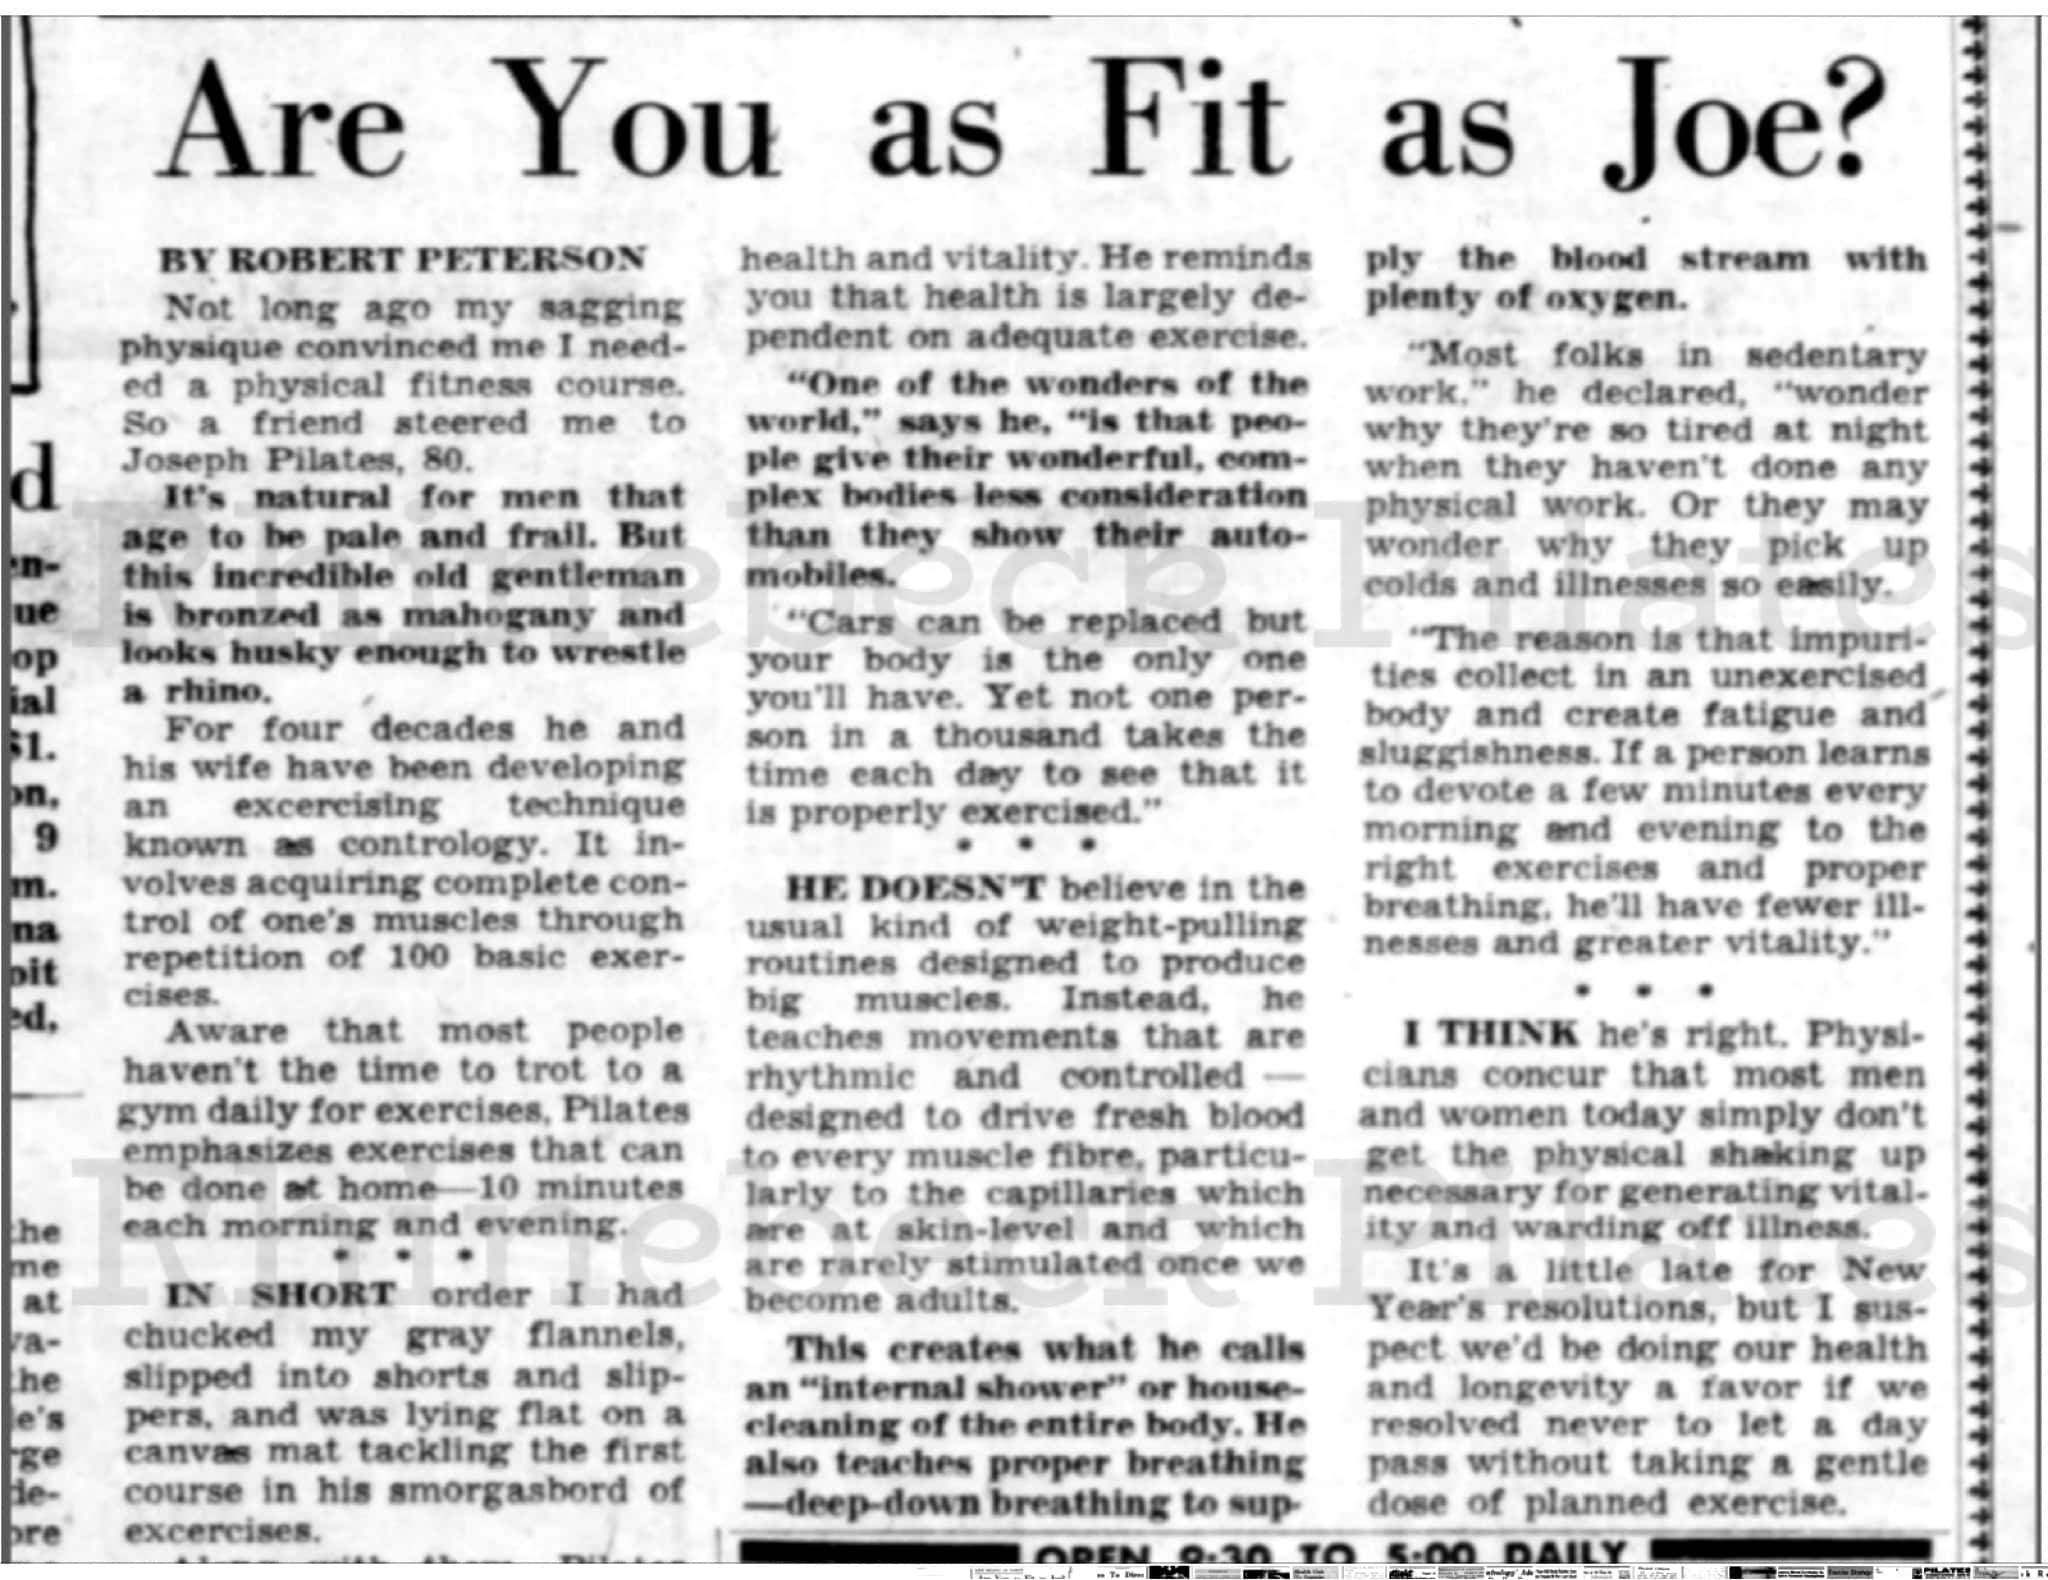 "Are You As Fit AS Joe?" archive article